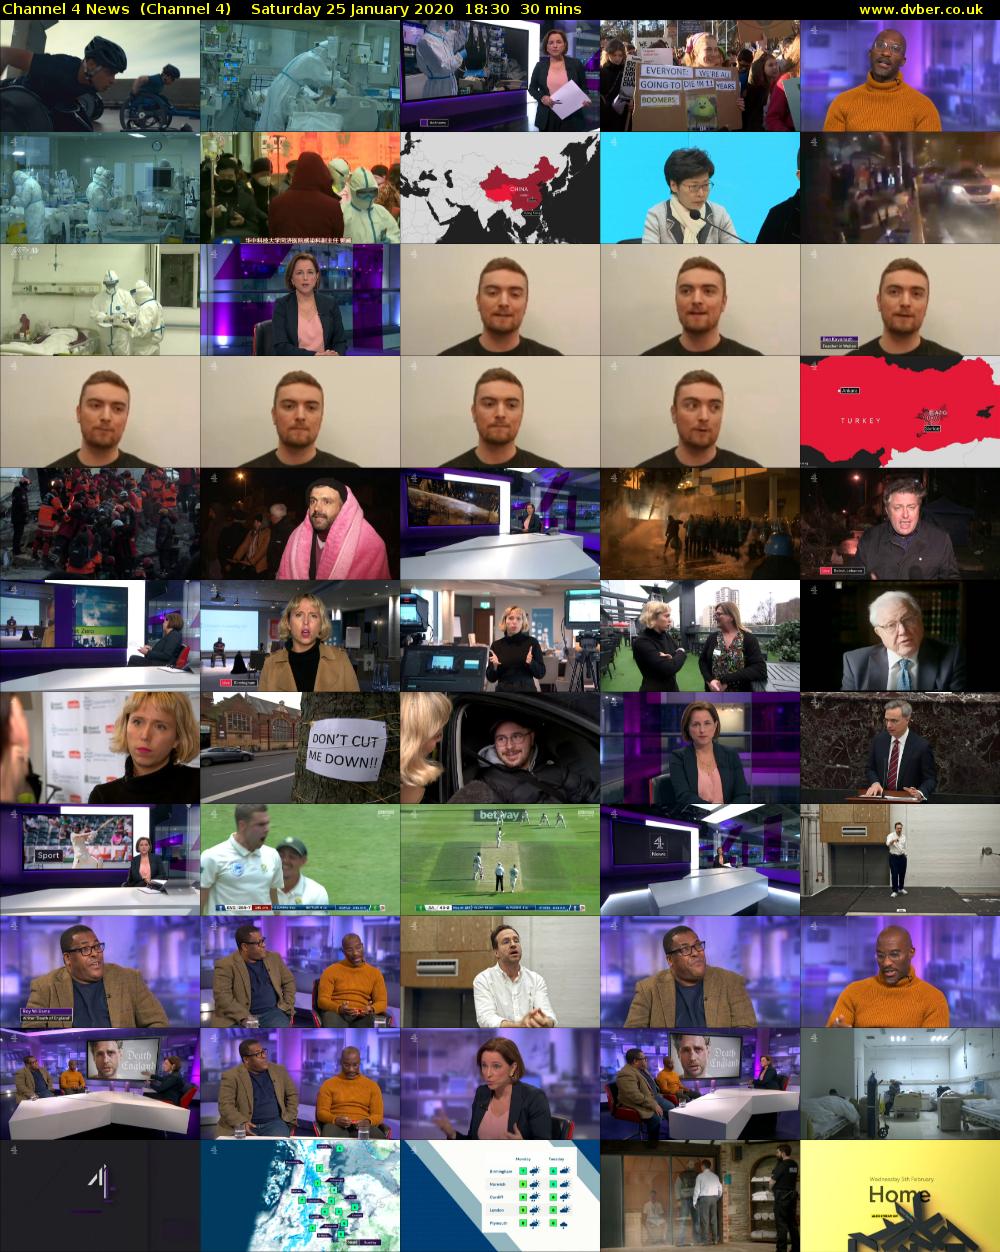 Channel 4 News  (Channel 4) Saturday 25 January 2020 18:30 - 19:00